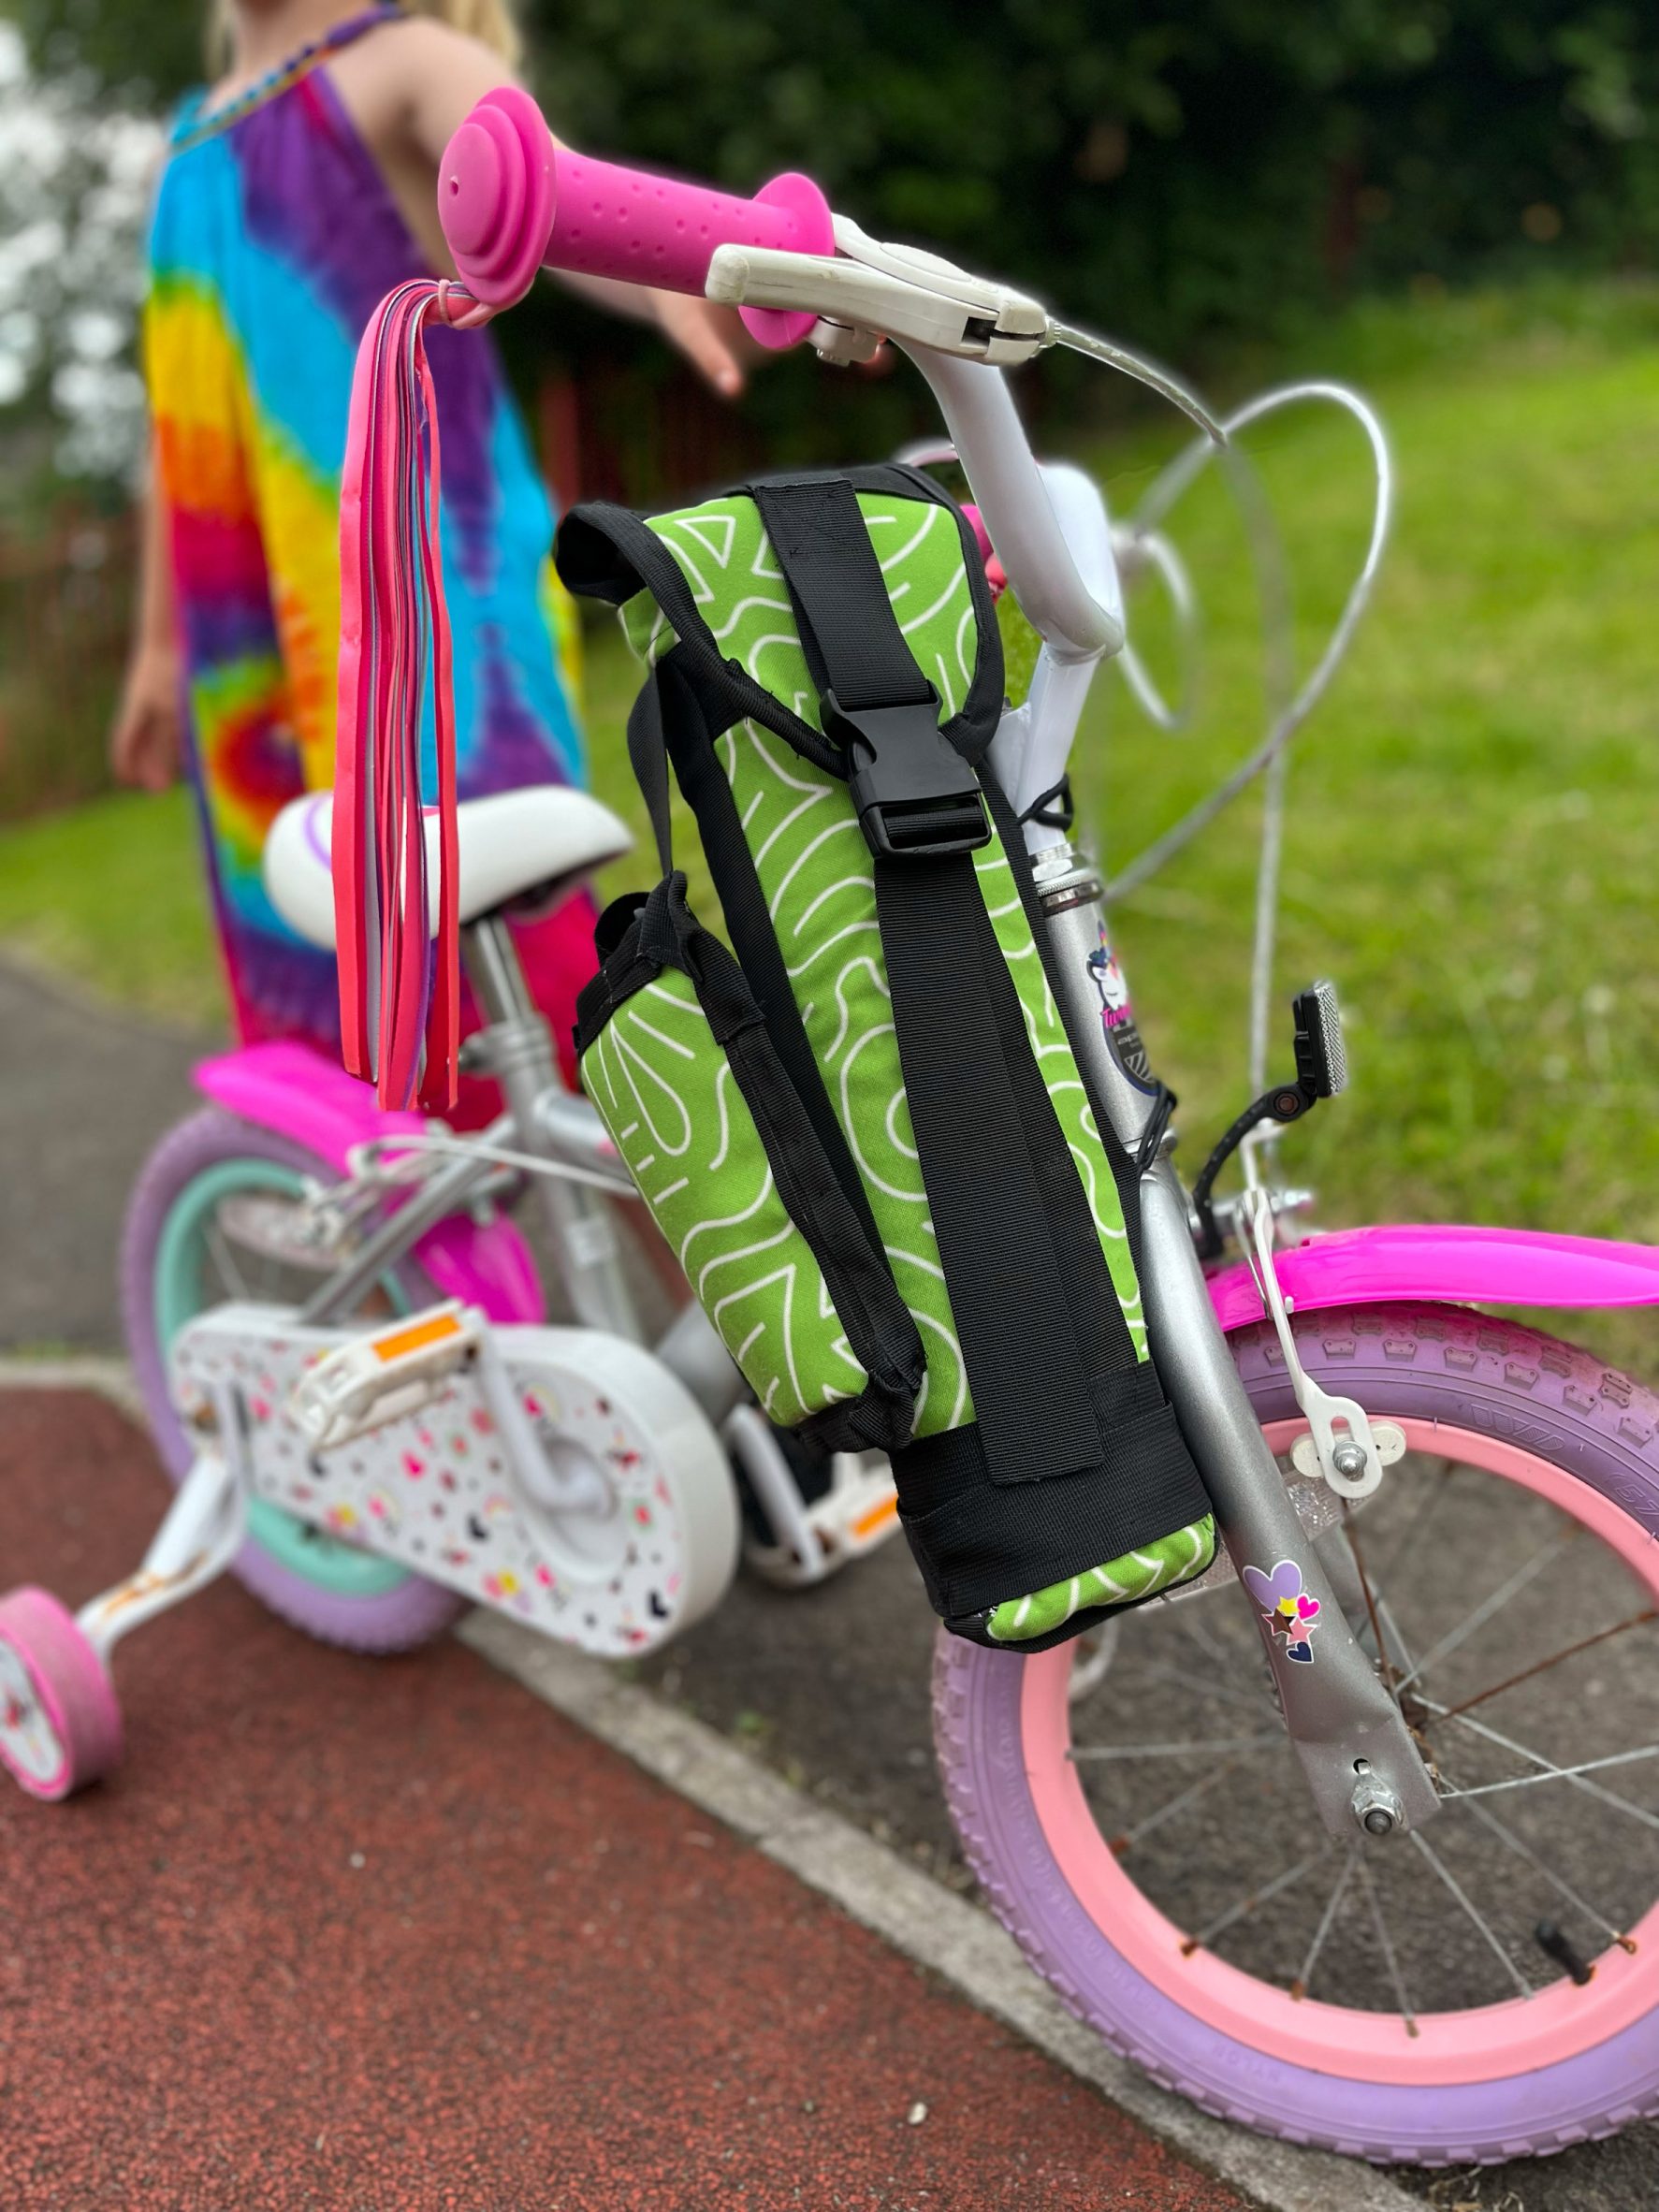 Photograph showing green and black strapped carry case attached to pink children's bike